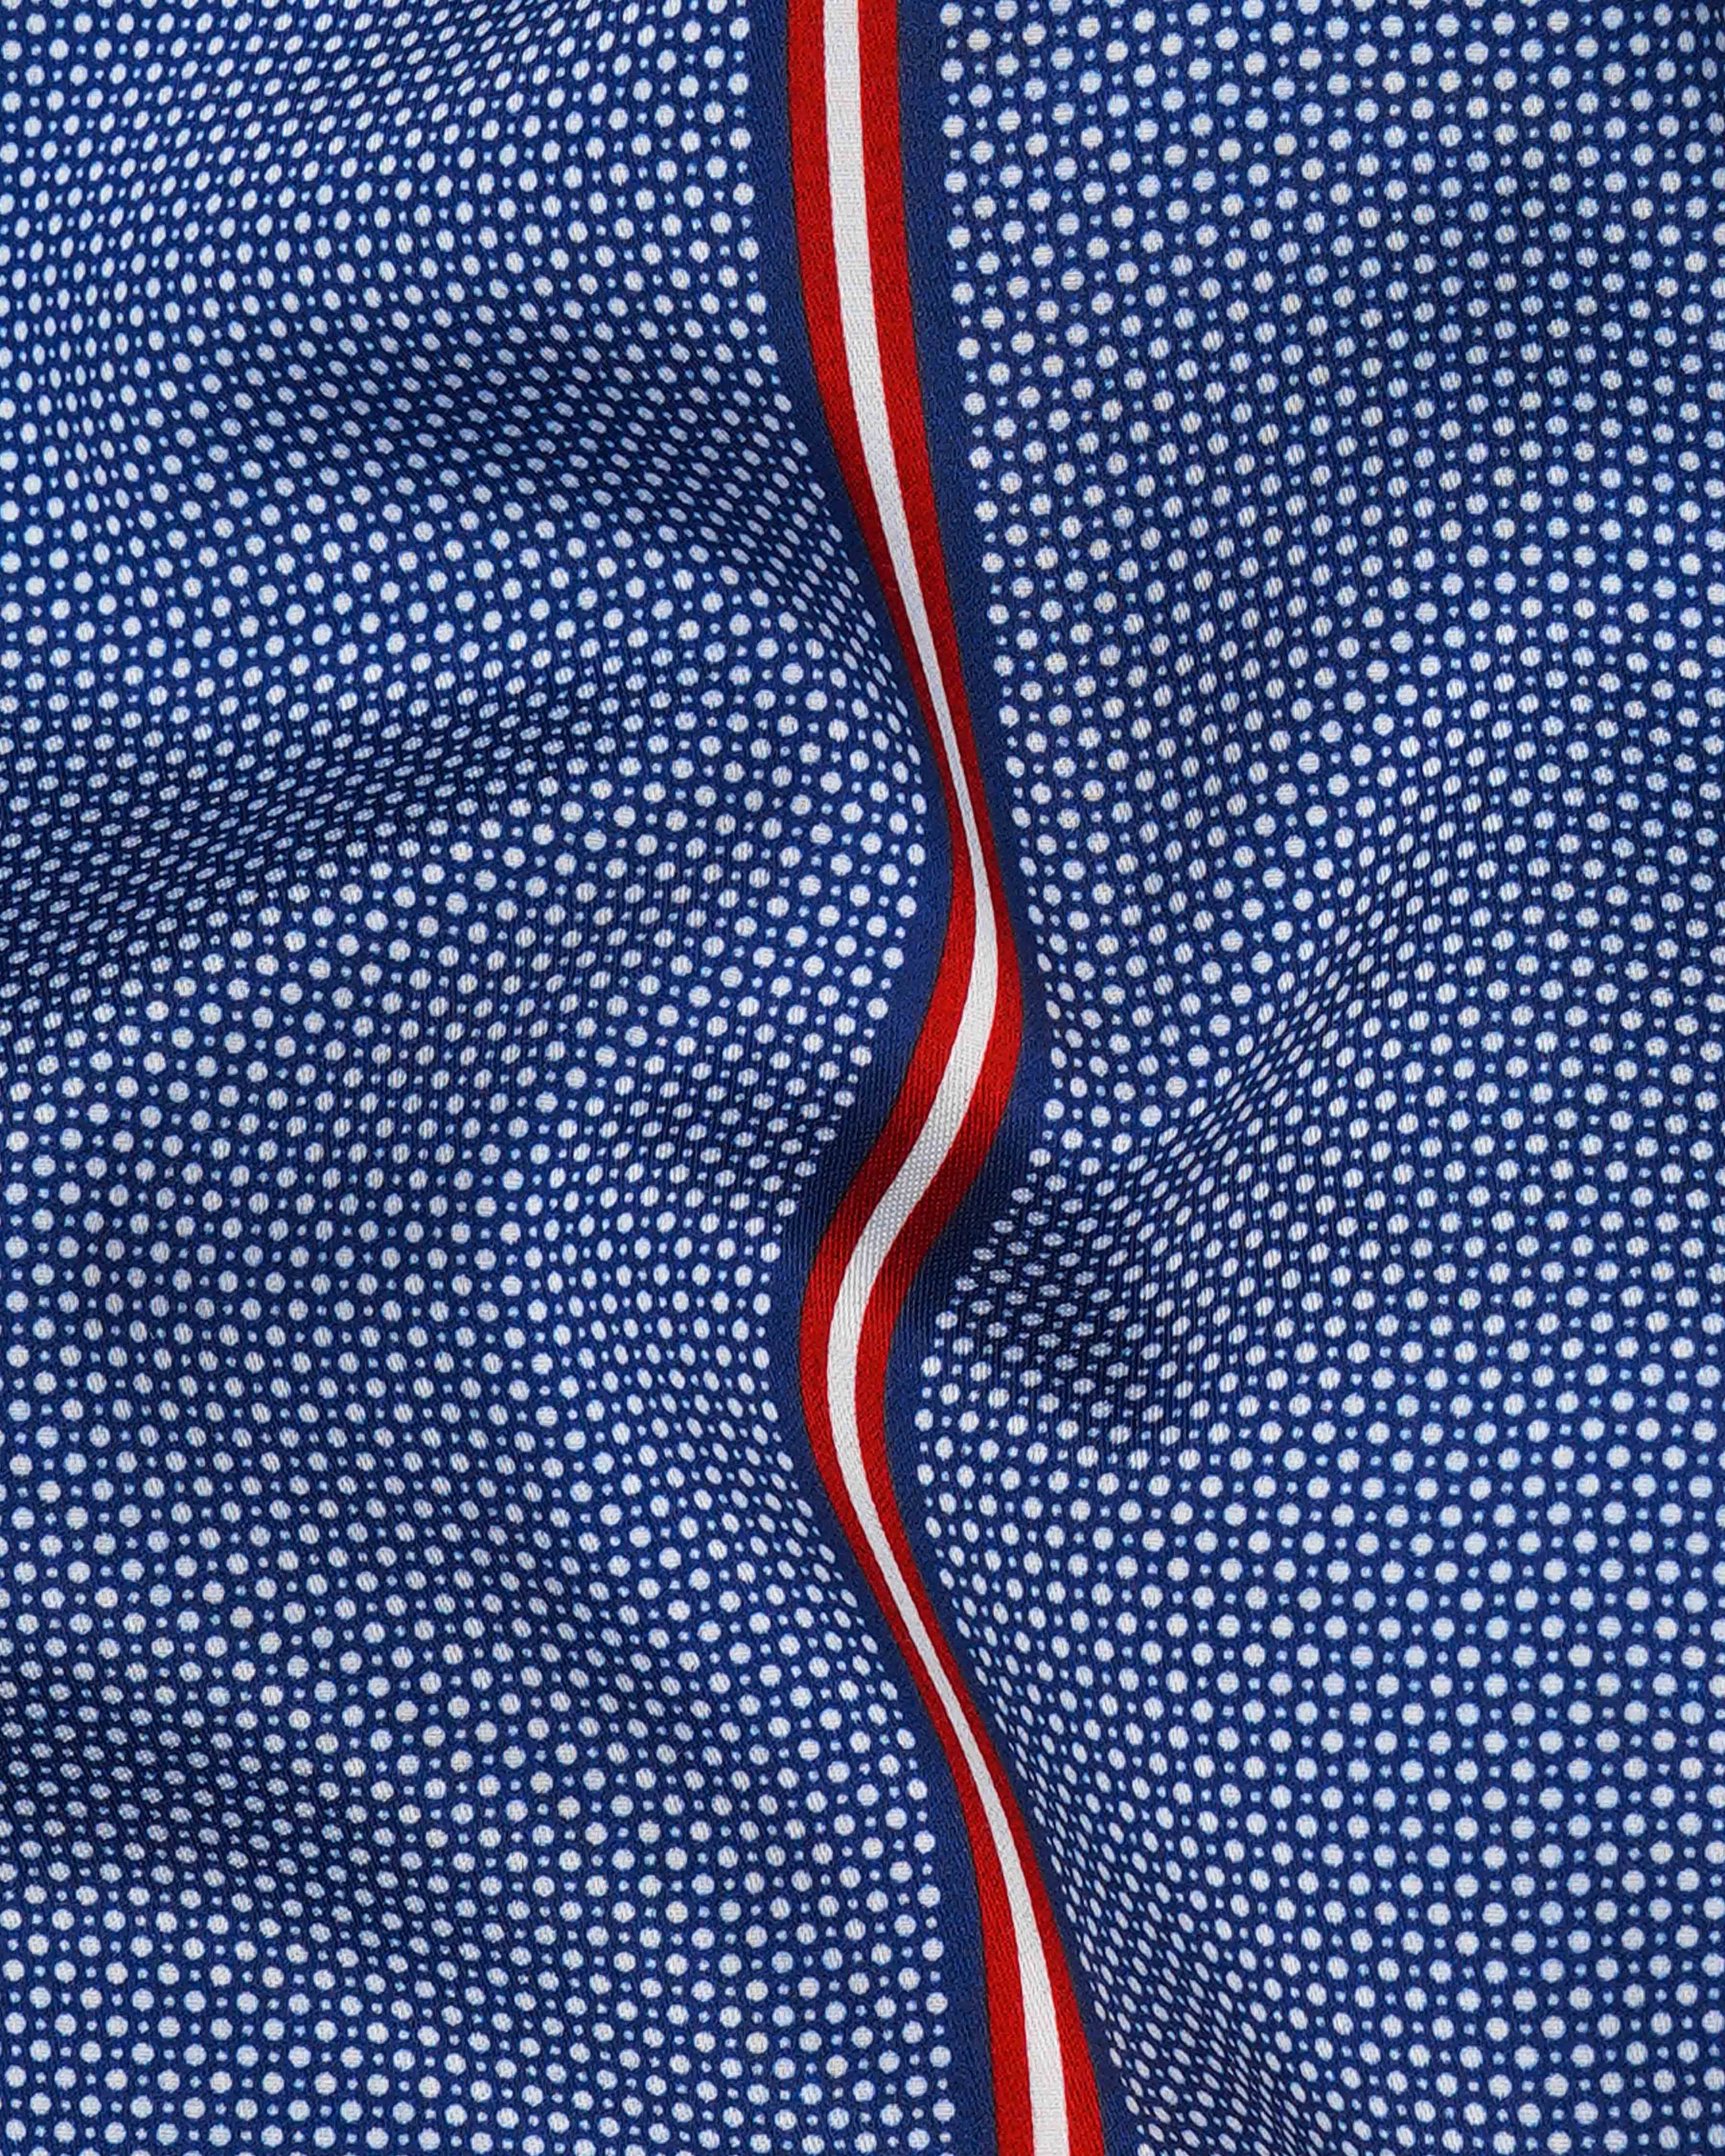 Downriver Blue with Sangria Red and White Polka Dots Super Soft Premium Cotton Shirt 8035-CA-BLE-38, 8035-CA-BLE-H-38, 8035-CA-BLE-39,8035-CA-BLE-H-39, 8035-CA-BLE-40, 8035-CA-BLE-H-40, 8035-CA-BLE-42, 8035-CA-BLE-H-42, 8035-CA-BLE-44, 8035-CA-BLE-H-44, 8035-CA-BLE-46, 8035-CA-BLE-H-46, 8035-CA-BLE-48, 8035-CA-BLE-H-48, 8035-CA-BLE-50, 8035-CA-BLE-H-50, 8035-CA-BLE-52, 8035-CA-BLE-H-52 